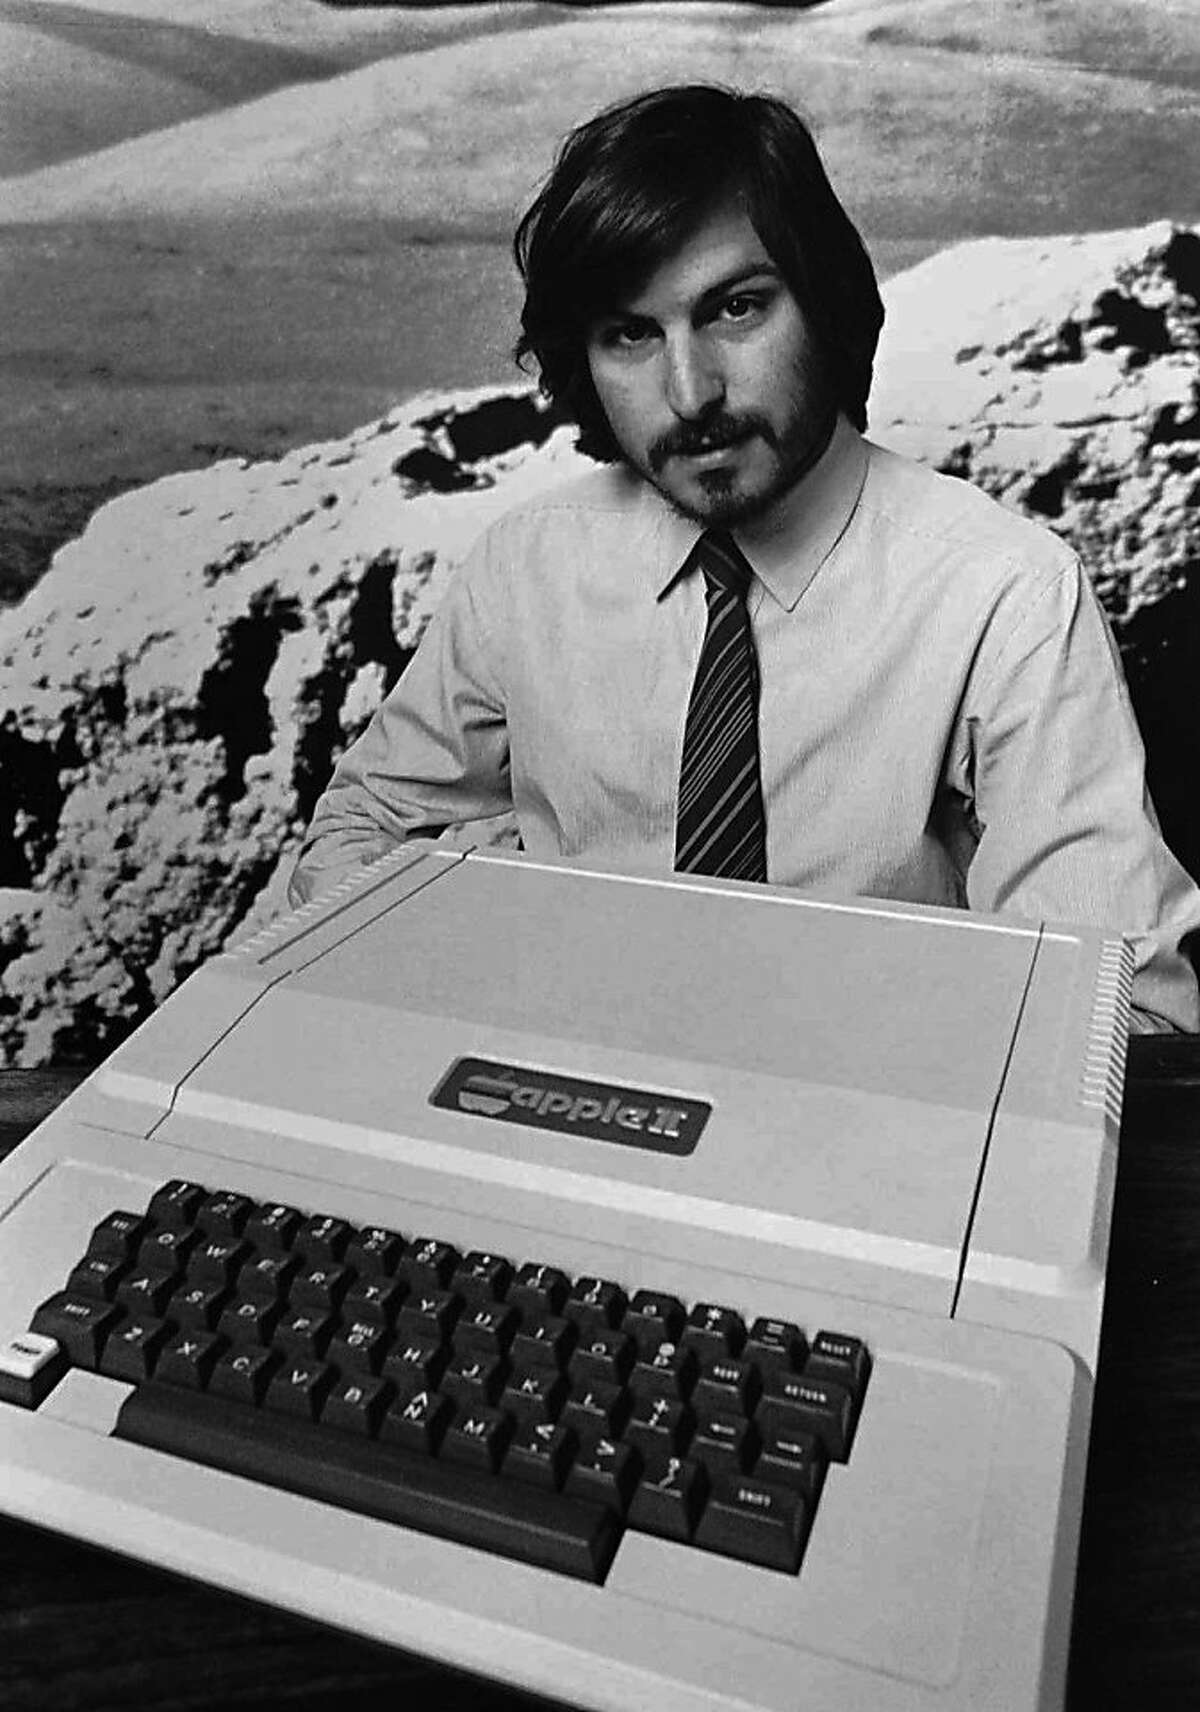 This is a 1977 photo of Apple Computer Inc. founder Steve Jobs as he introduces the new Apple II in Cupertino, Calif. Apple Computer was formed 20 years ago, on April Fool's Day in 1976. This is a 1977 photo of Apple Computer Inc. founder Steve Jobs as he introduces the new Apple II in Cupertino, Calif. Apple Computer was formed 20 years ago, on April Fool's Day in 1976. (AP Photo/Apple Computers Inc., file) Ran on: 01-09-2006 Ran on: 03-26-2006 Apple co-founder Steve Jobs introduces the new Apple II computer in Cupertino.